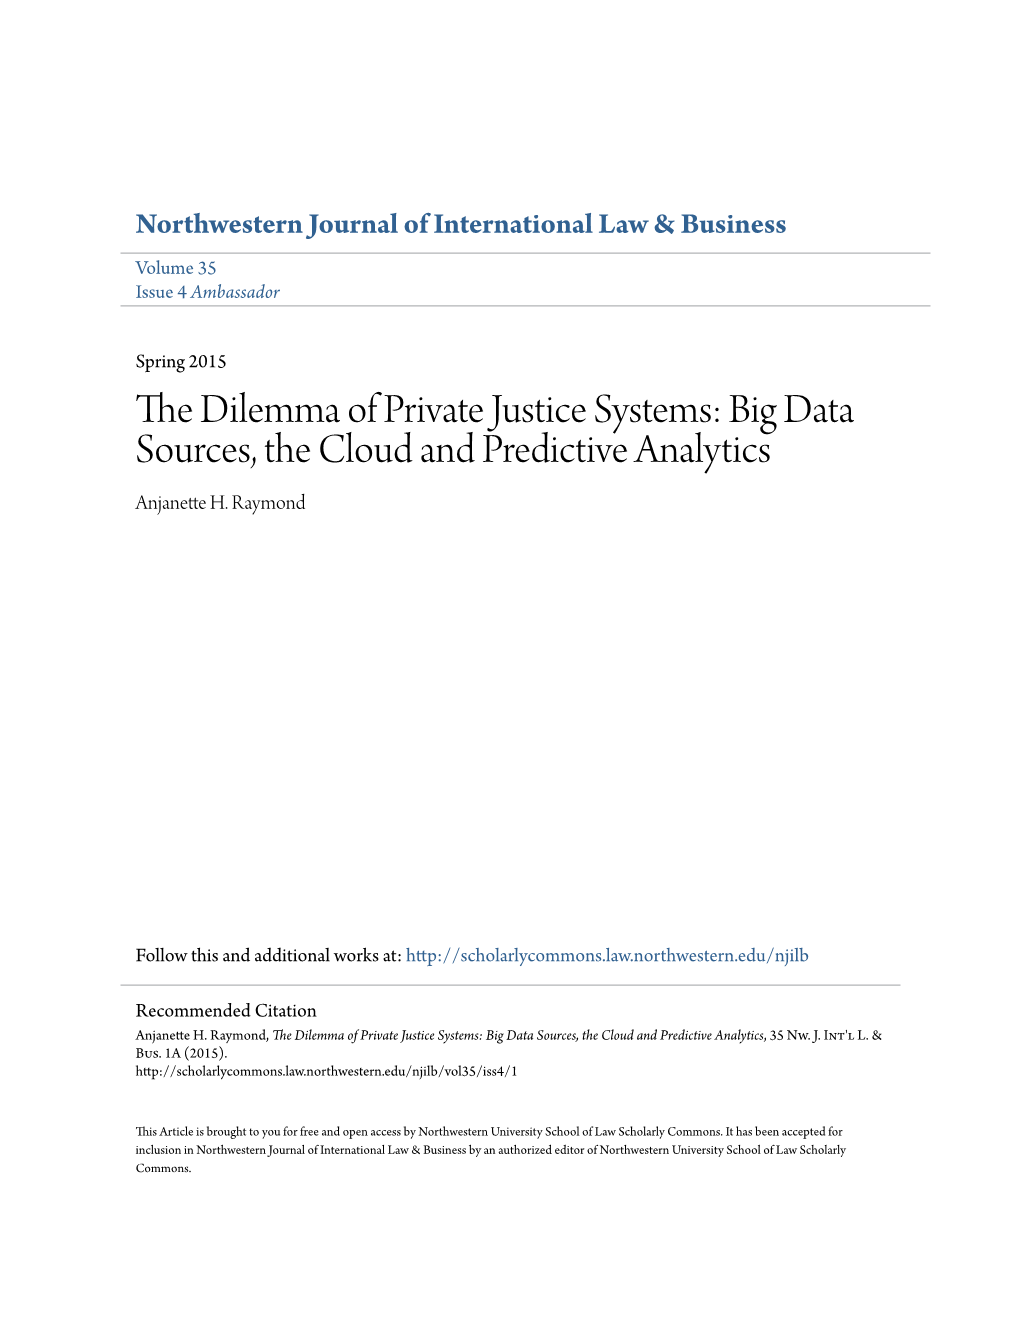 The Dilemma of Private Justice Systems: Big Data Sources, the Cloud and Predictive Analytics Anjanette H